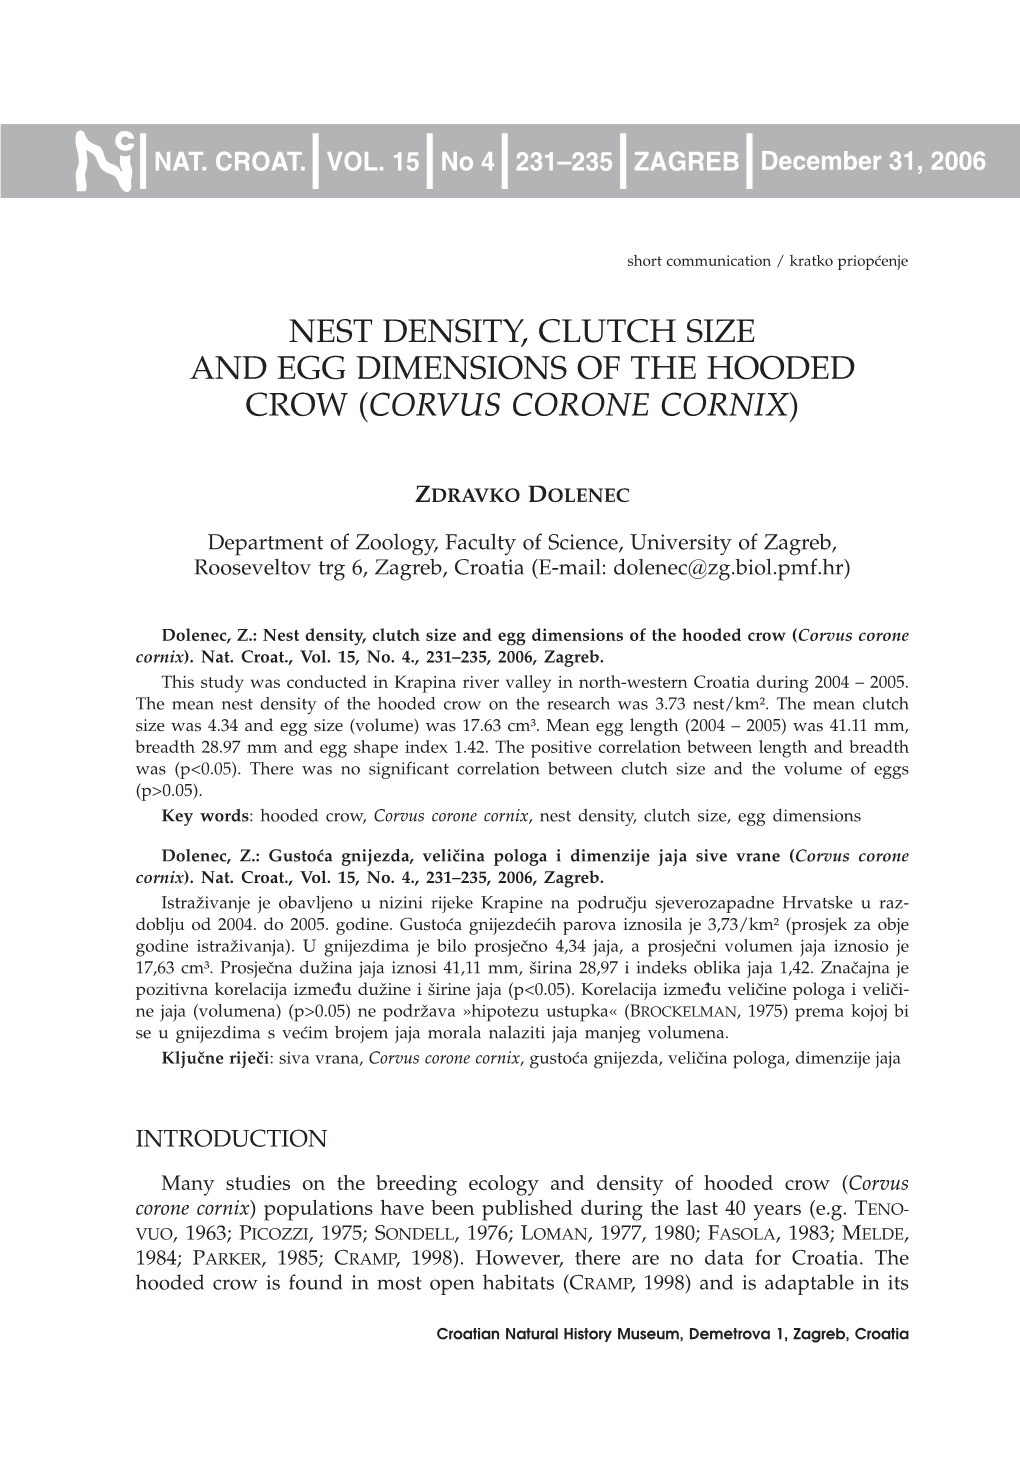 Nest Density, Clutch Size and Egg Dimensions of the Hooded Crow (Corvus Corone Cornix)